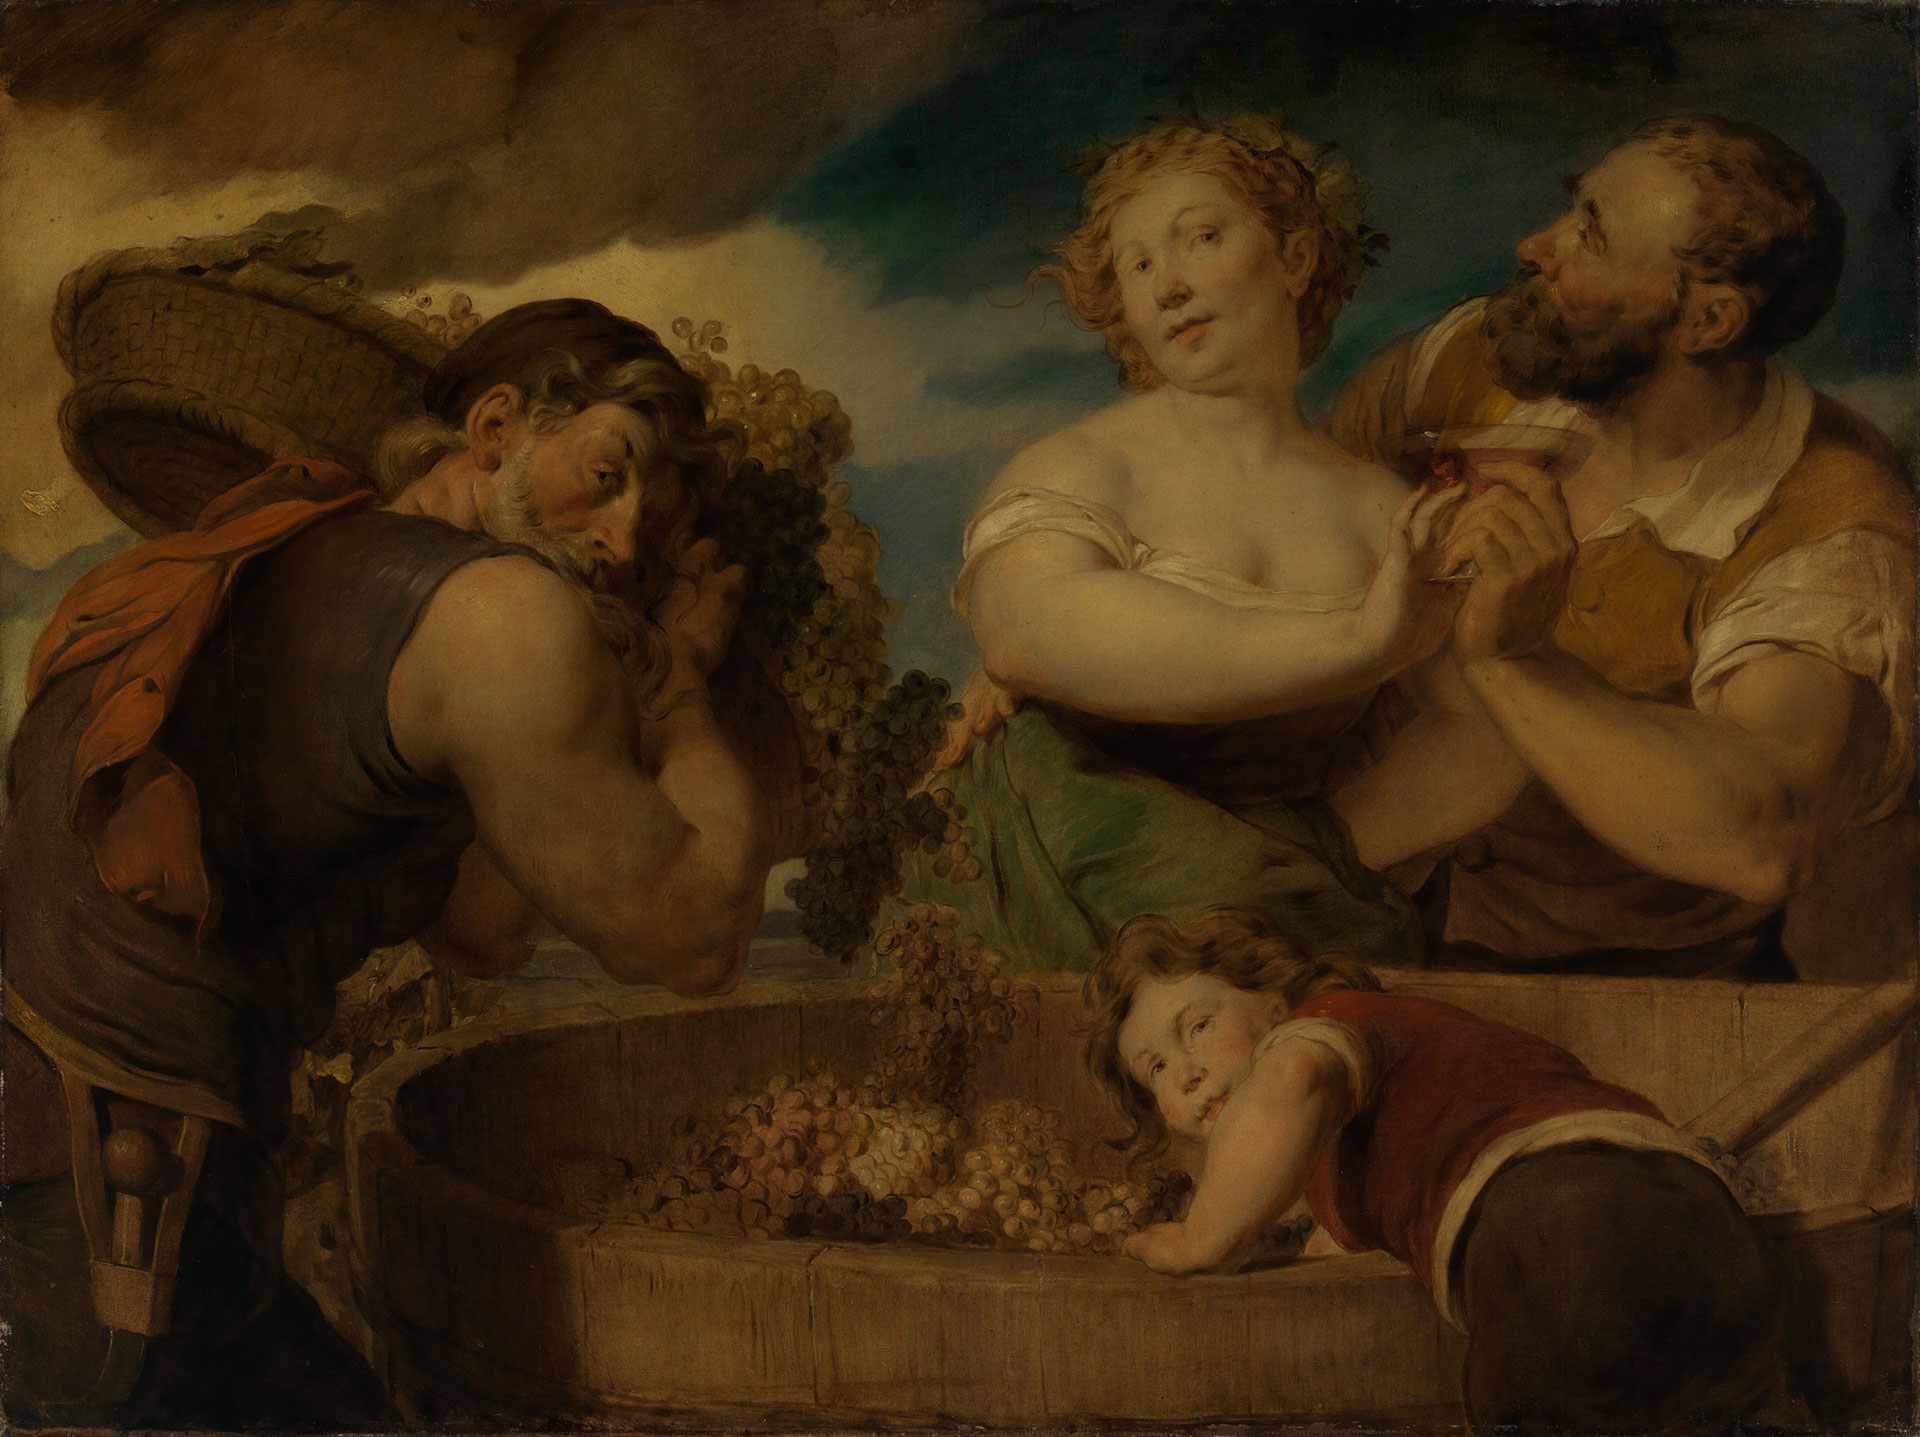 Illustration of the work "Weinlese" by Hans Canon. Two men, a child and a woman stand around a barrel of grapes. A man hugs the woman, the other man carries a basket and the child reaches into the barrel. The work of art is in the Staatliche Kunsthalle Karlsruhe.